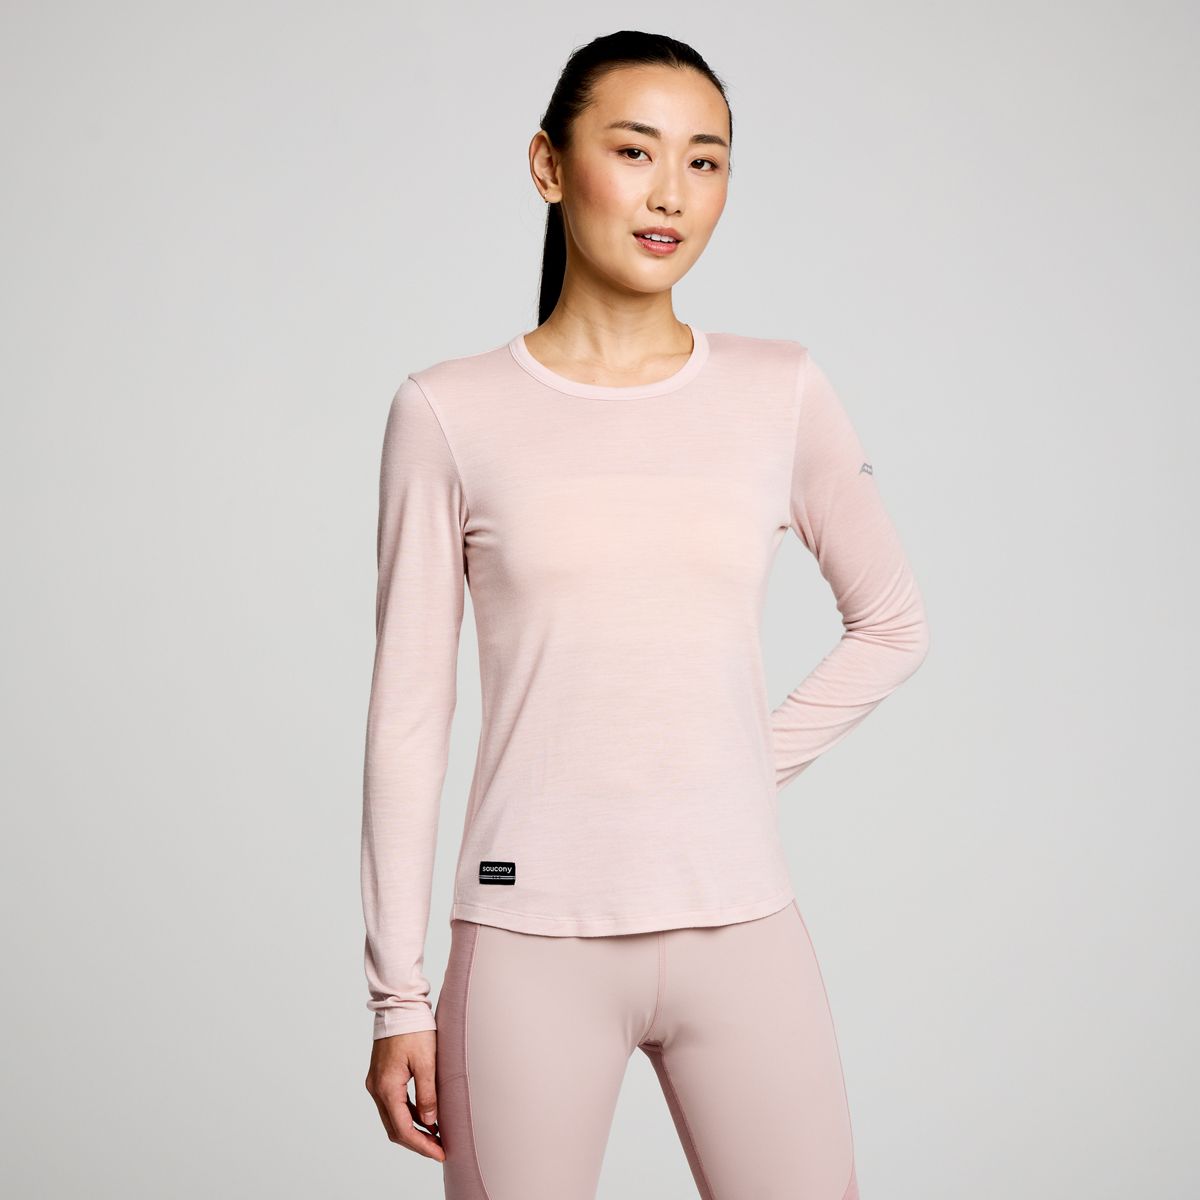 Kenvina Long Sleeve Shirts for Women Long Sleeve Workout Tops for